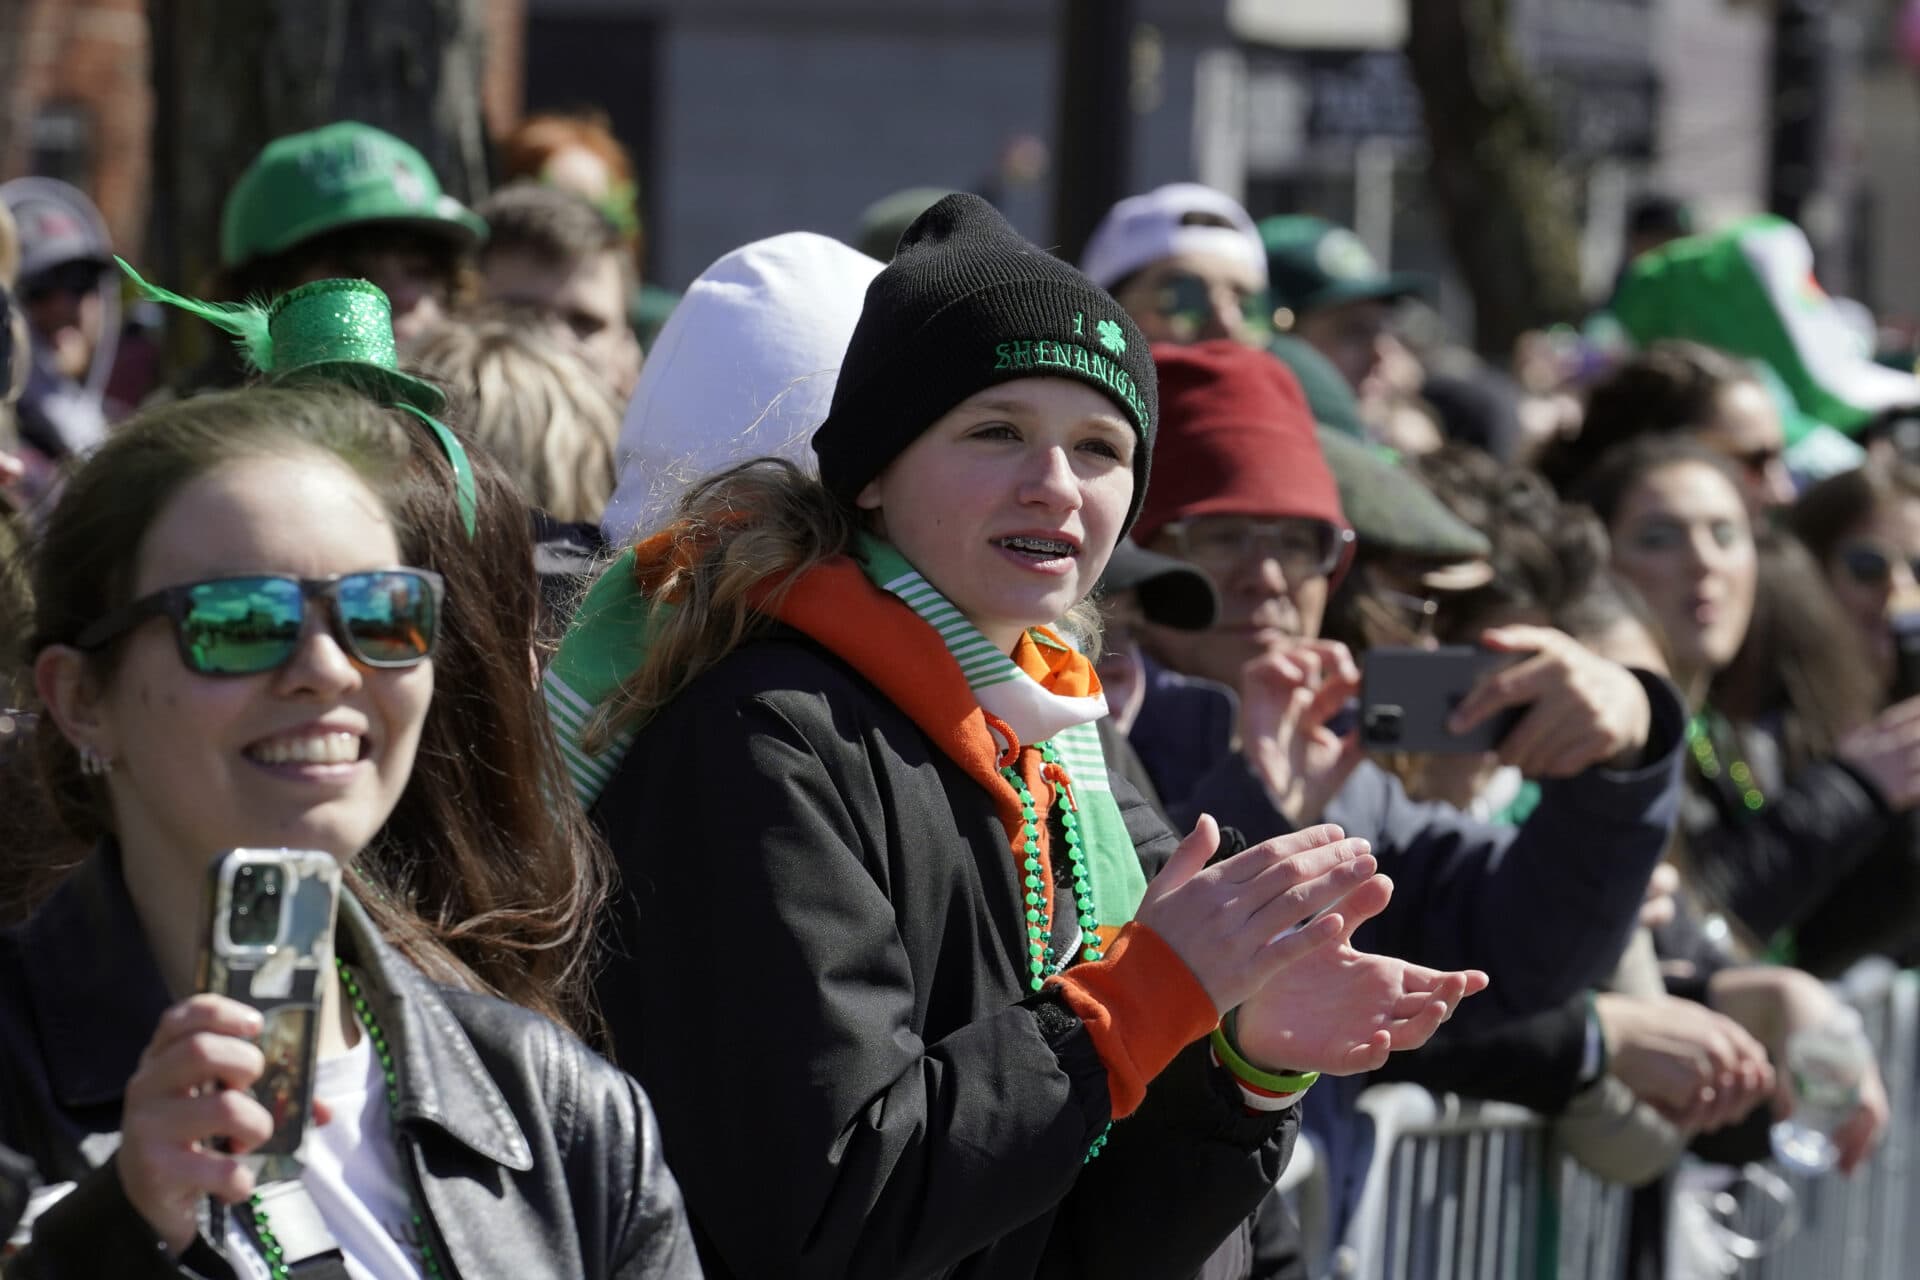 Spectators watch the annual St. Patrick's Day parade,, March 19, in Boston's South Boston neighborhood. (Steven Senne/AP)